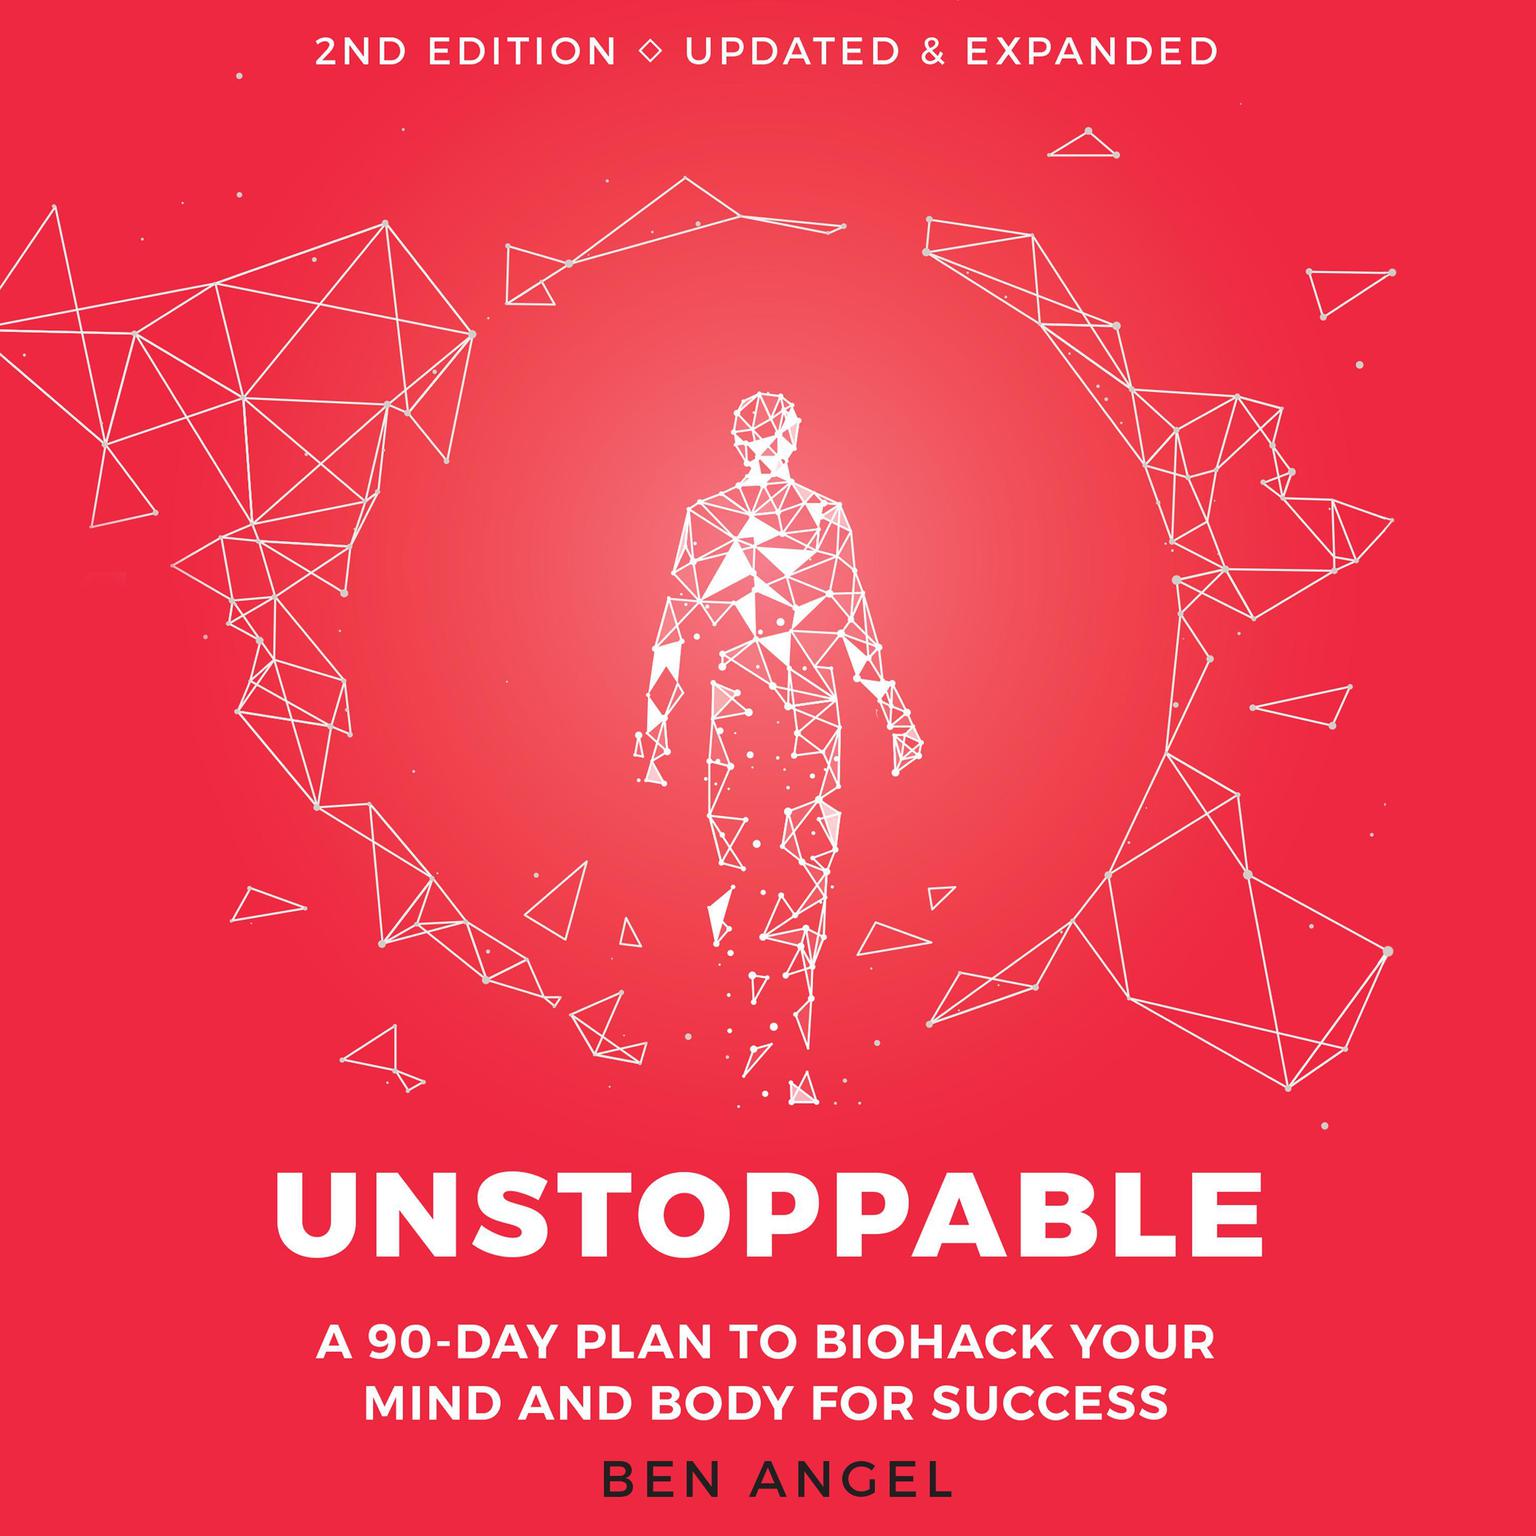 Unstoppable: A 90-Day Plan to Biohack Your Mind and Body for Success 2nd Edition Audiobook, by Ben Angel